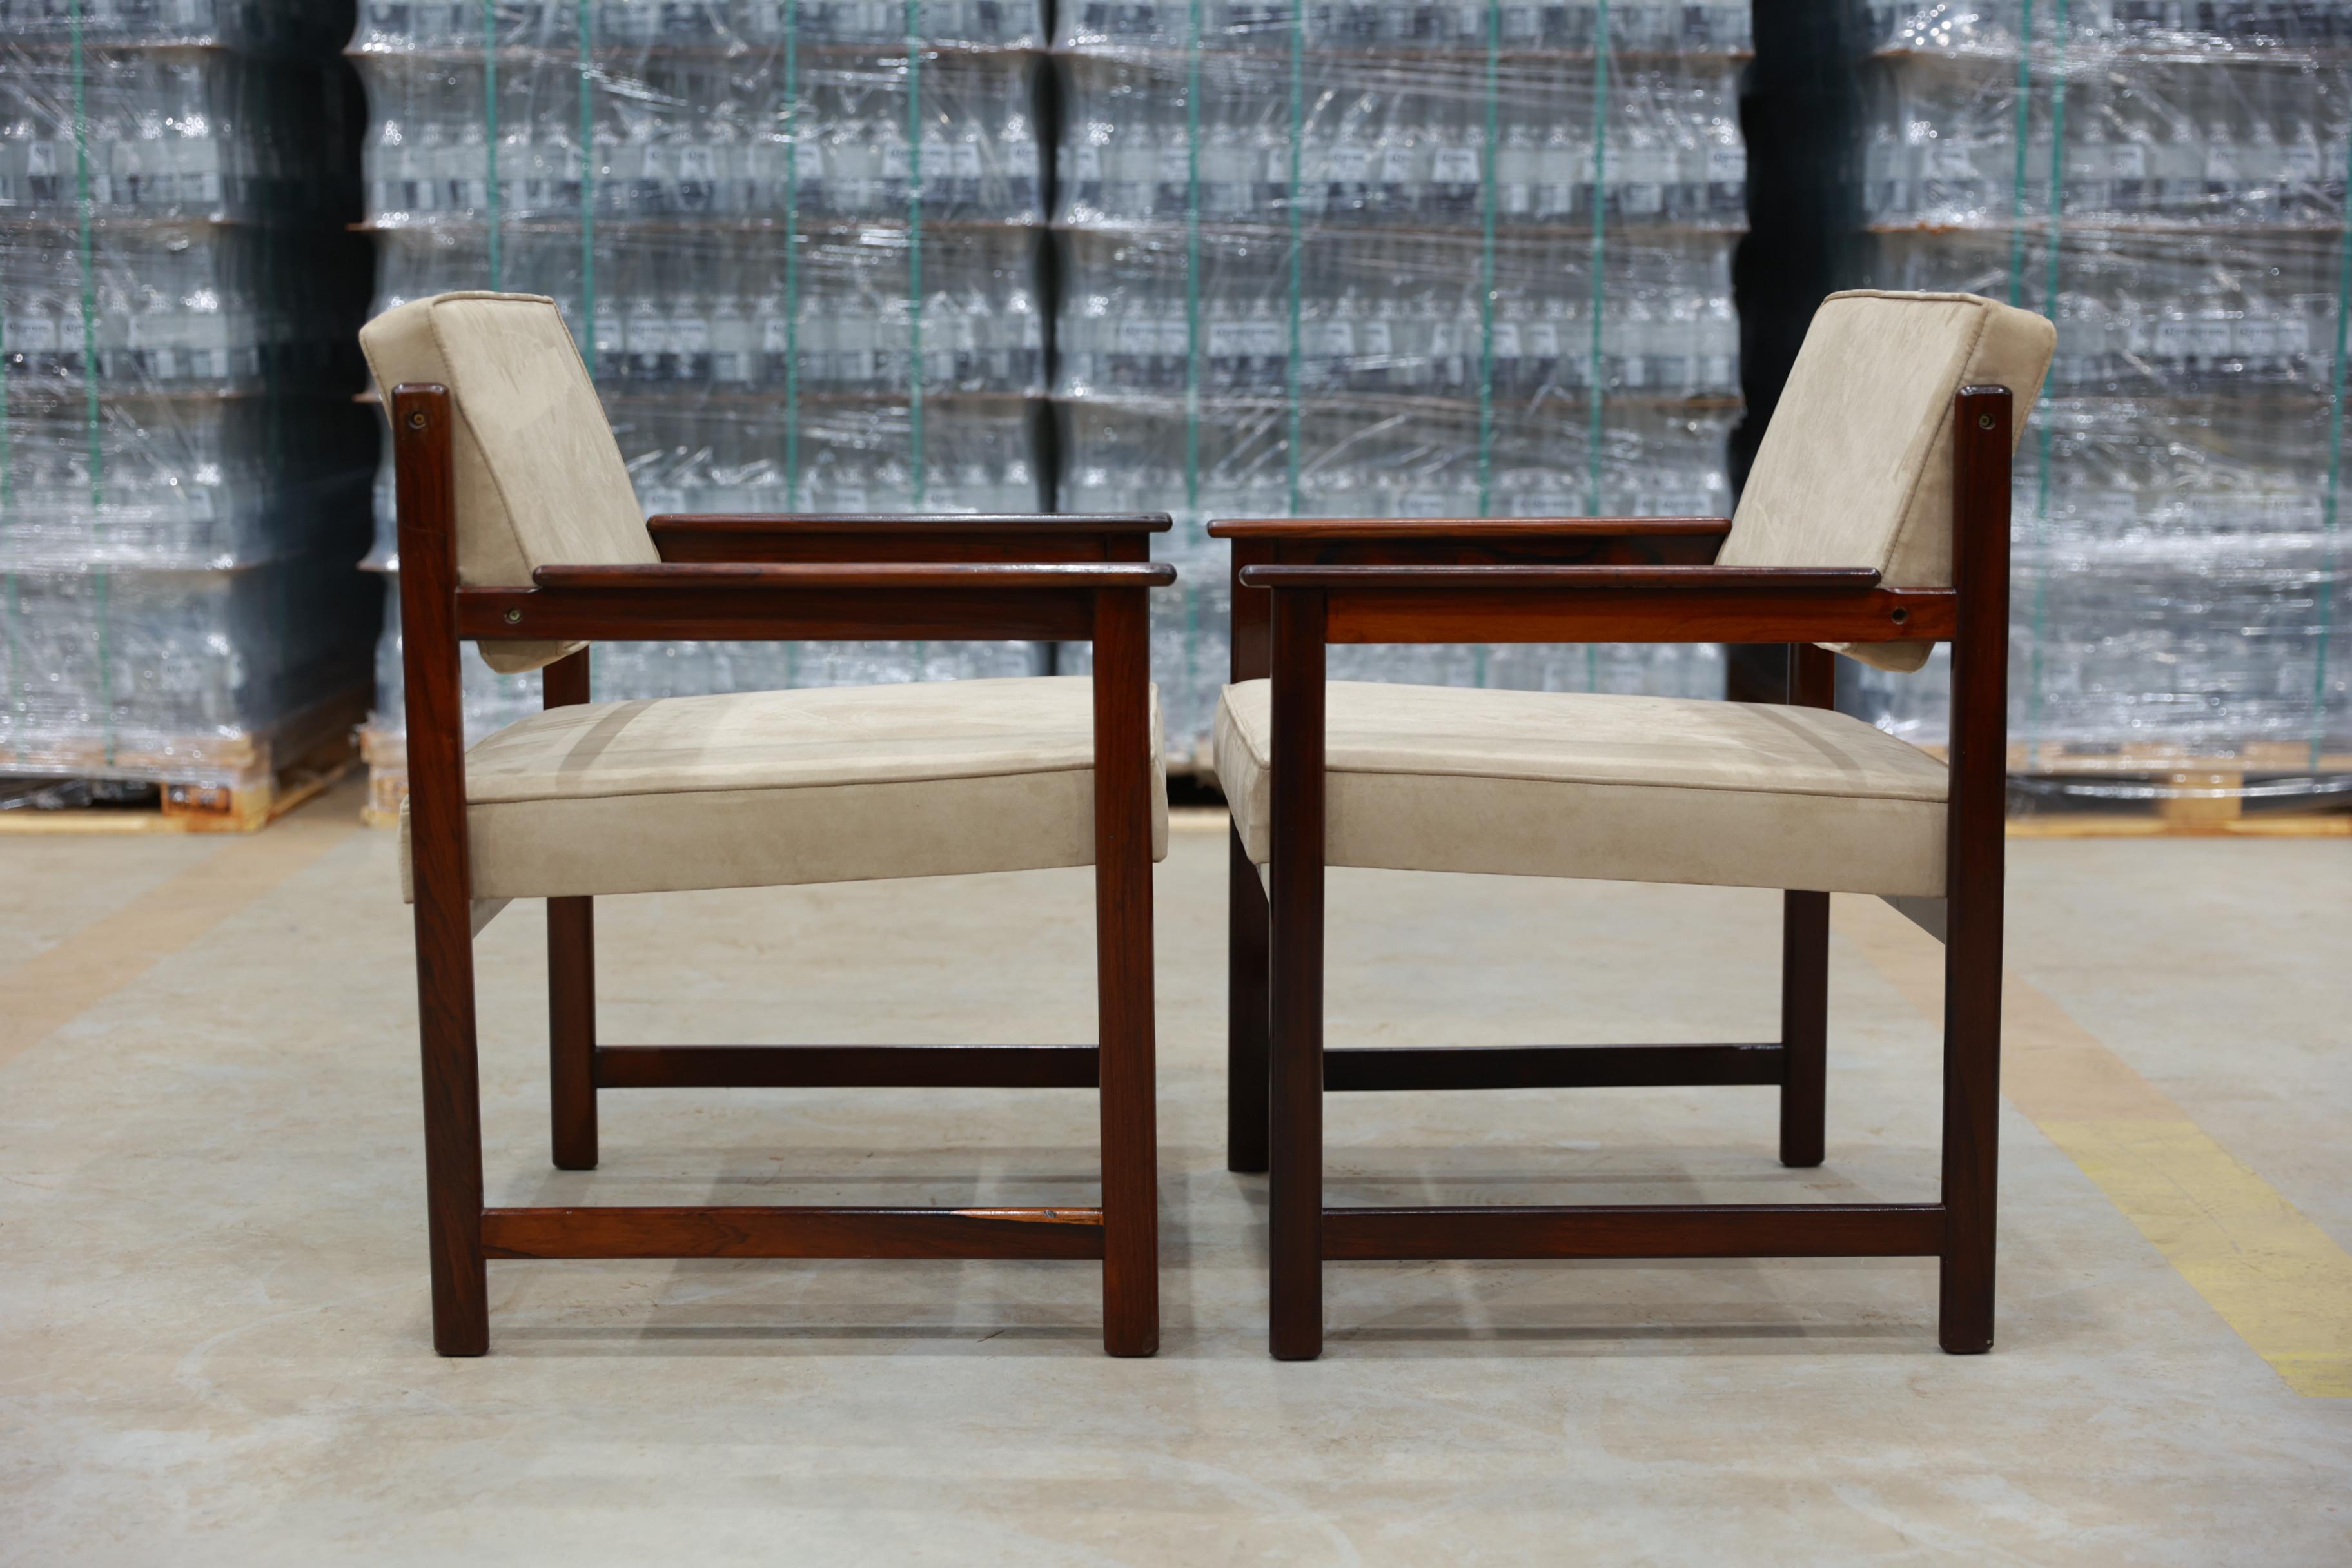 20th Century Midcentury Modern Armchairs in Hardwood & Beige Fabric by Jorge Jabour, Brazil For Sale